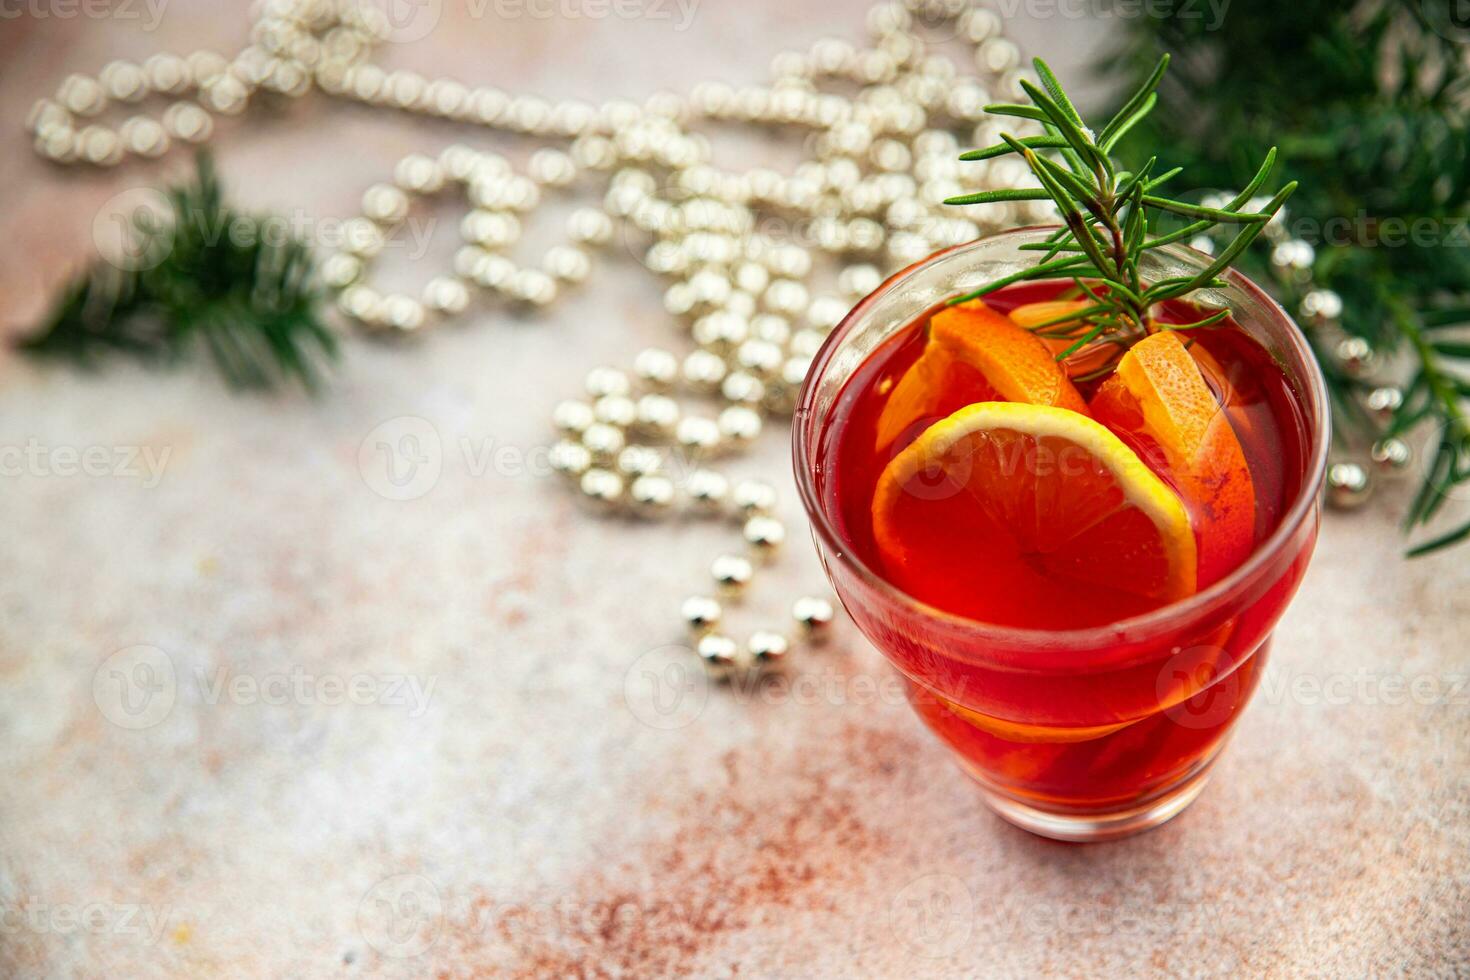 mulled wine christmas cocktail citrus rosemary drink new year holiday appetizer meal food snack on the table copy space food background rustic top view photo